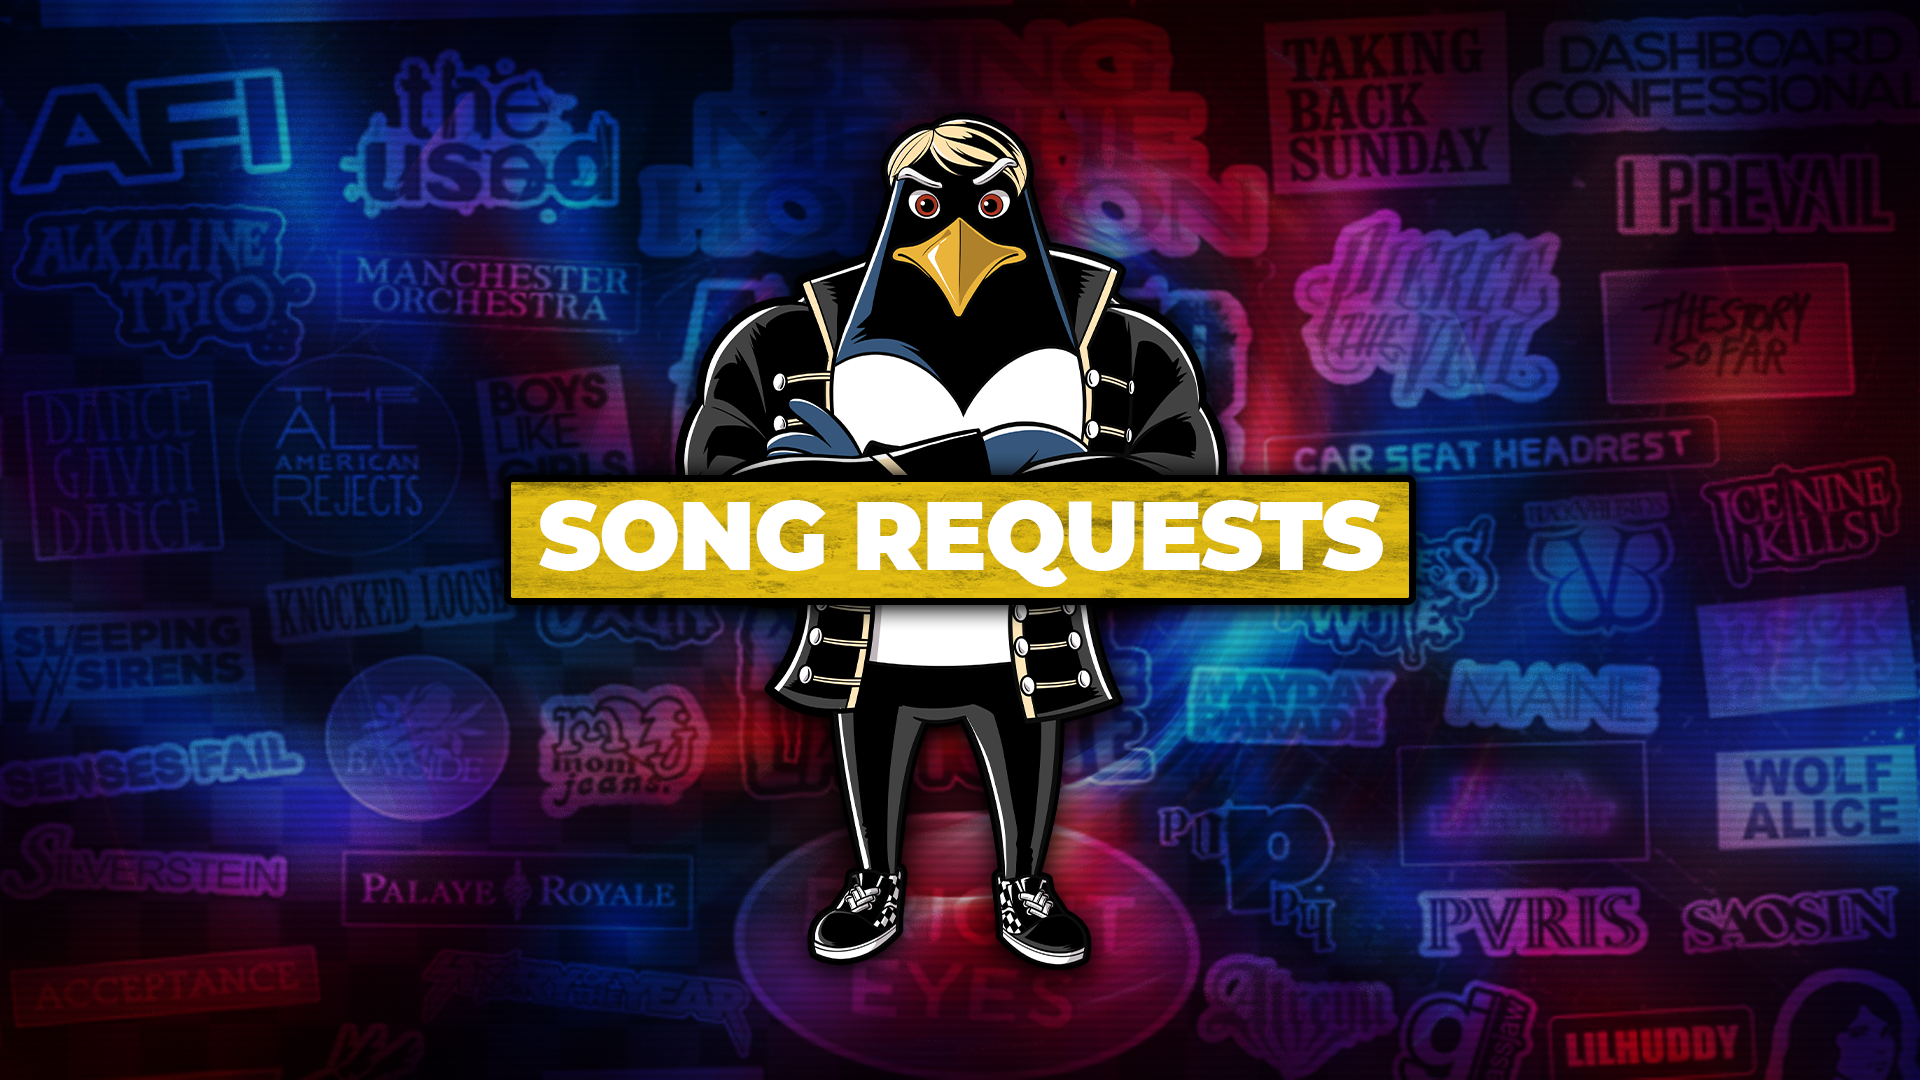 A vibrant Emo Night promotional graphic featuring a cartoon penguin dressed in punk rock attire standing in front of a neon-lit backdrop with names of various emo and punk bands, like AFI, The Used, and Dashboard Confessional, illuminated in bright colors. The penguin, symbolizing a DJ, is holding a book with the bold text 'SONG REQUESTS' in yellow, encouraging attendees to pick their favorite emo tracks for the event.